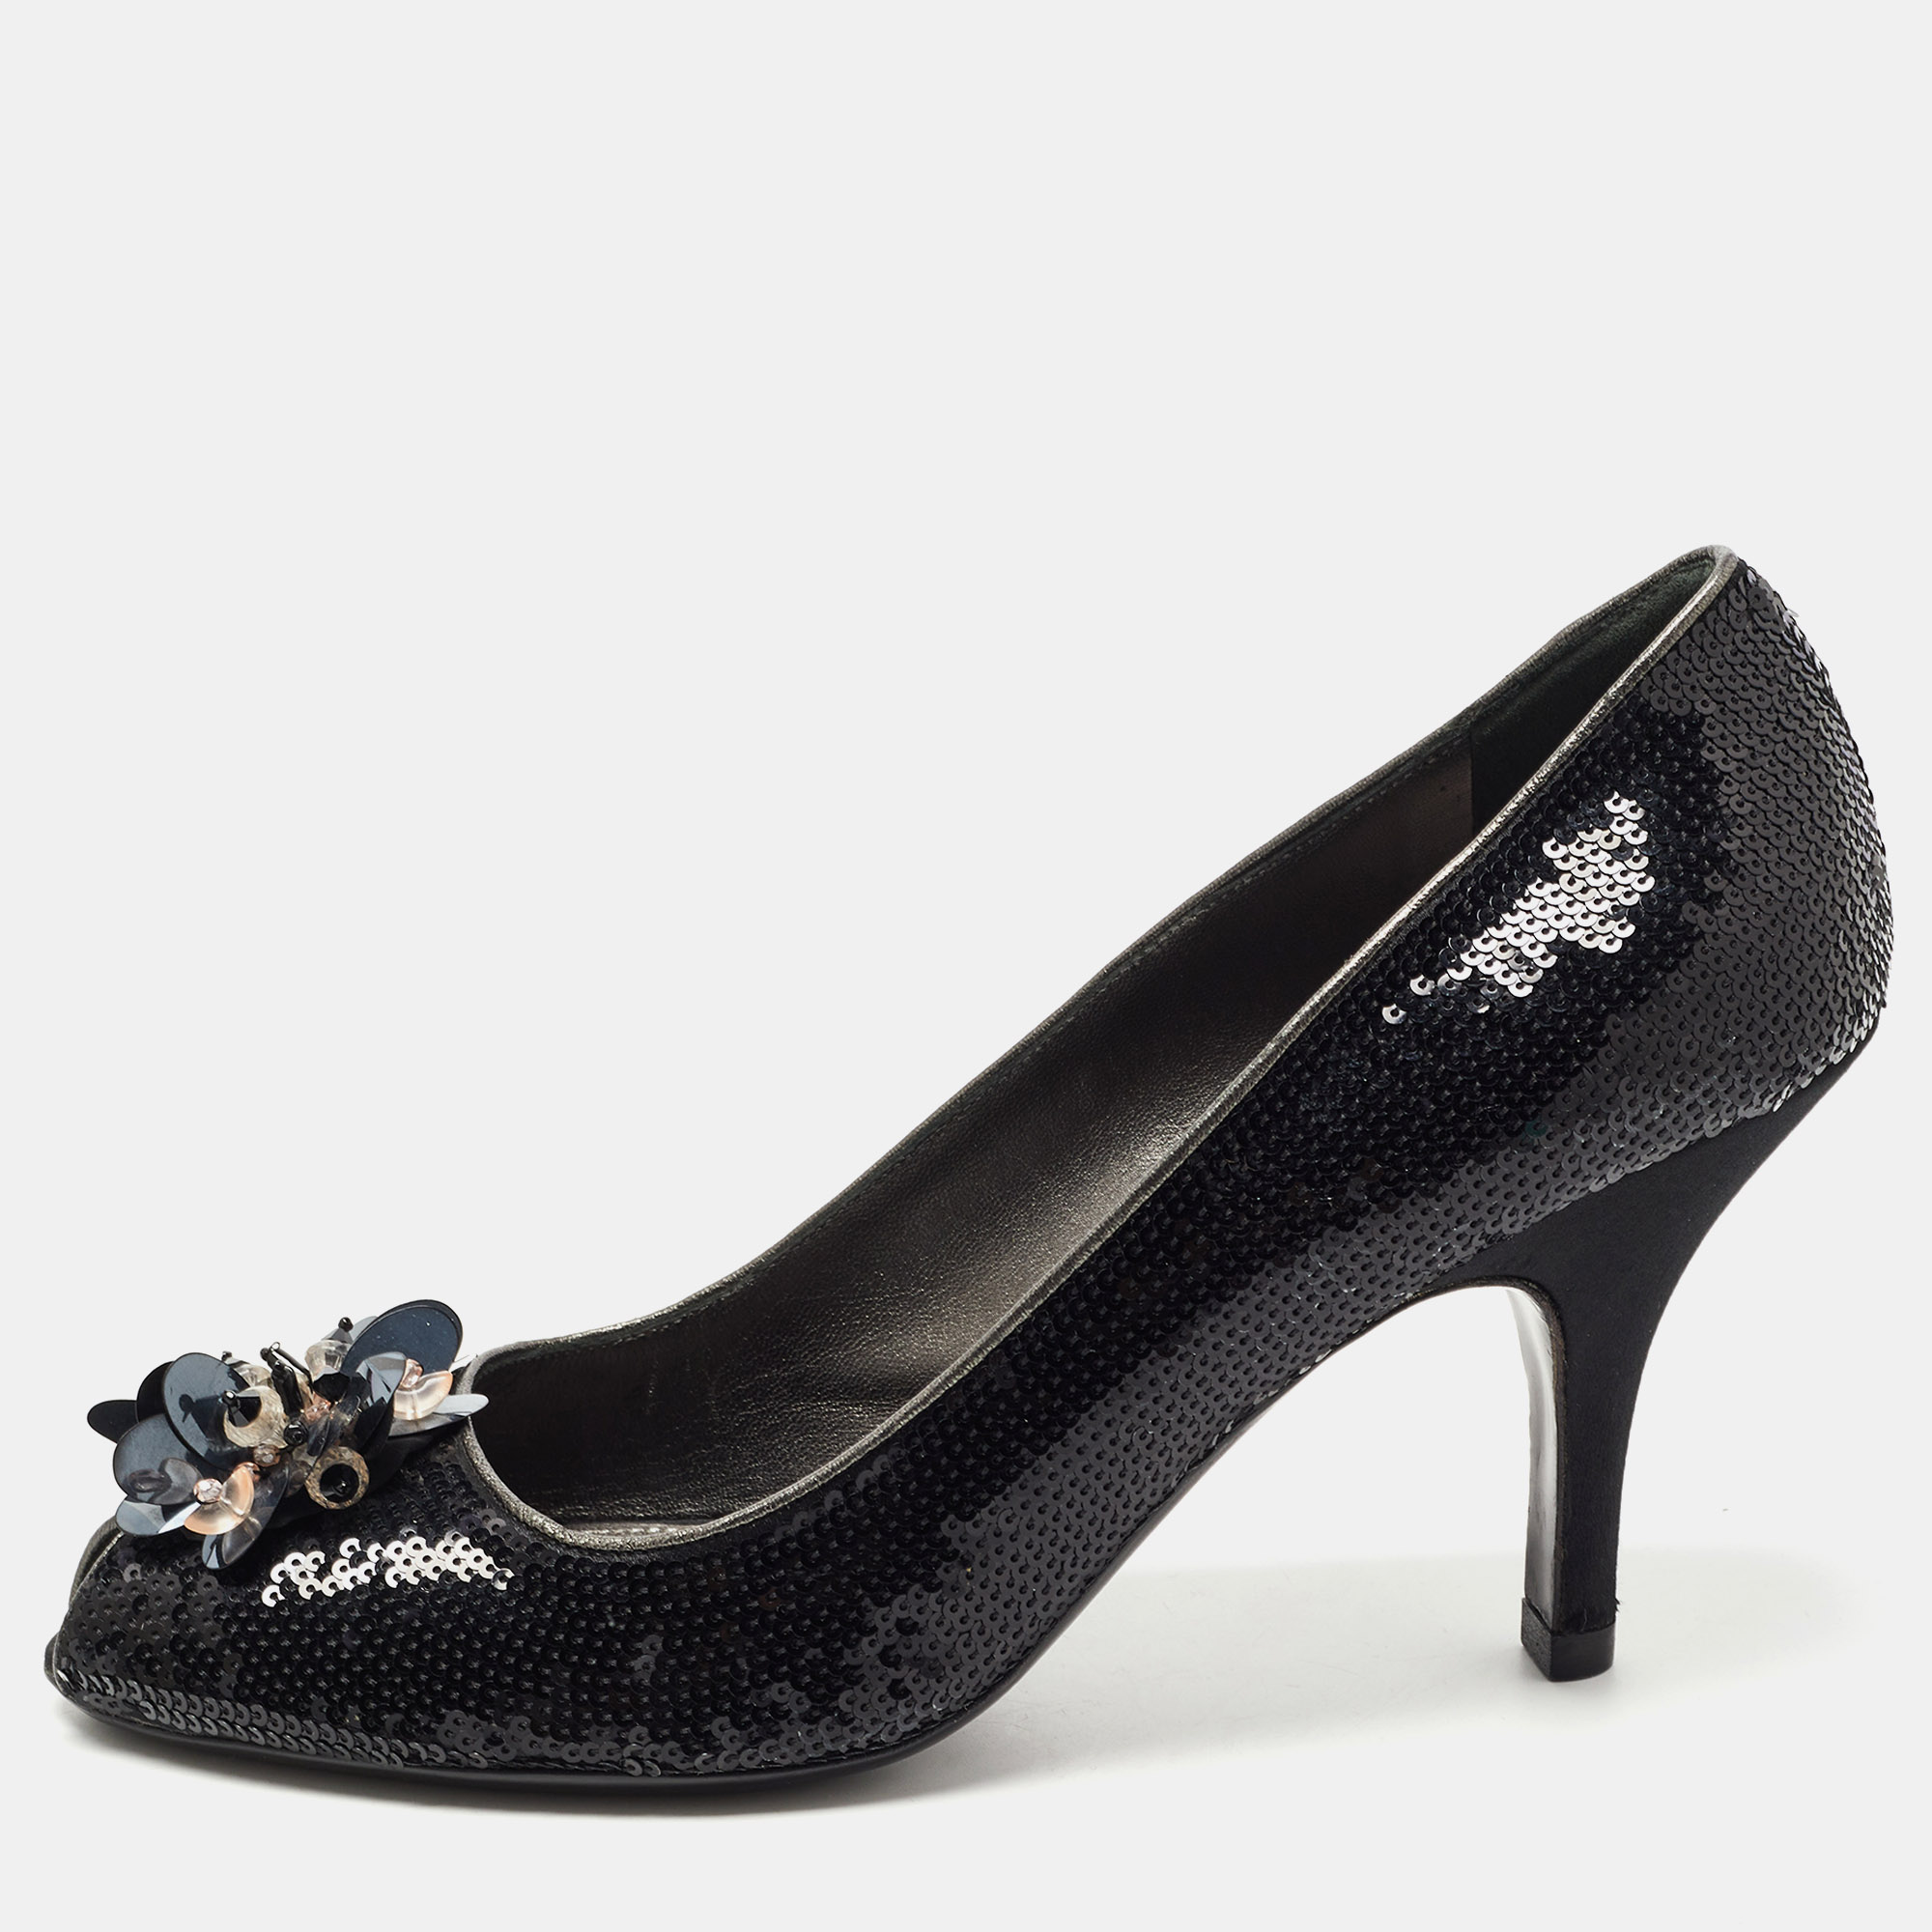 Pre-owned Prada Black Leather And Sequin Flower Embellished Peep Toe Pumps Size 40